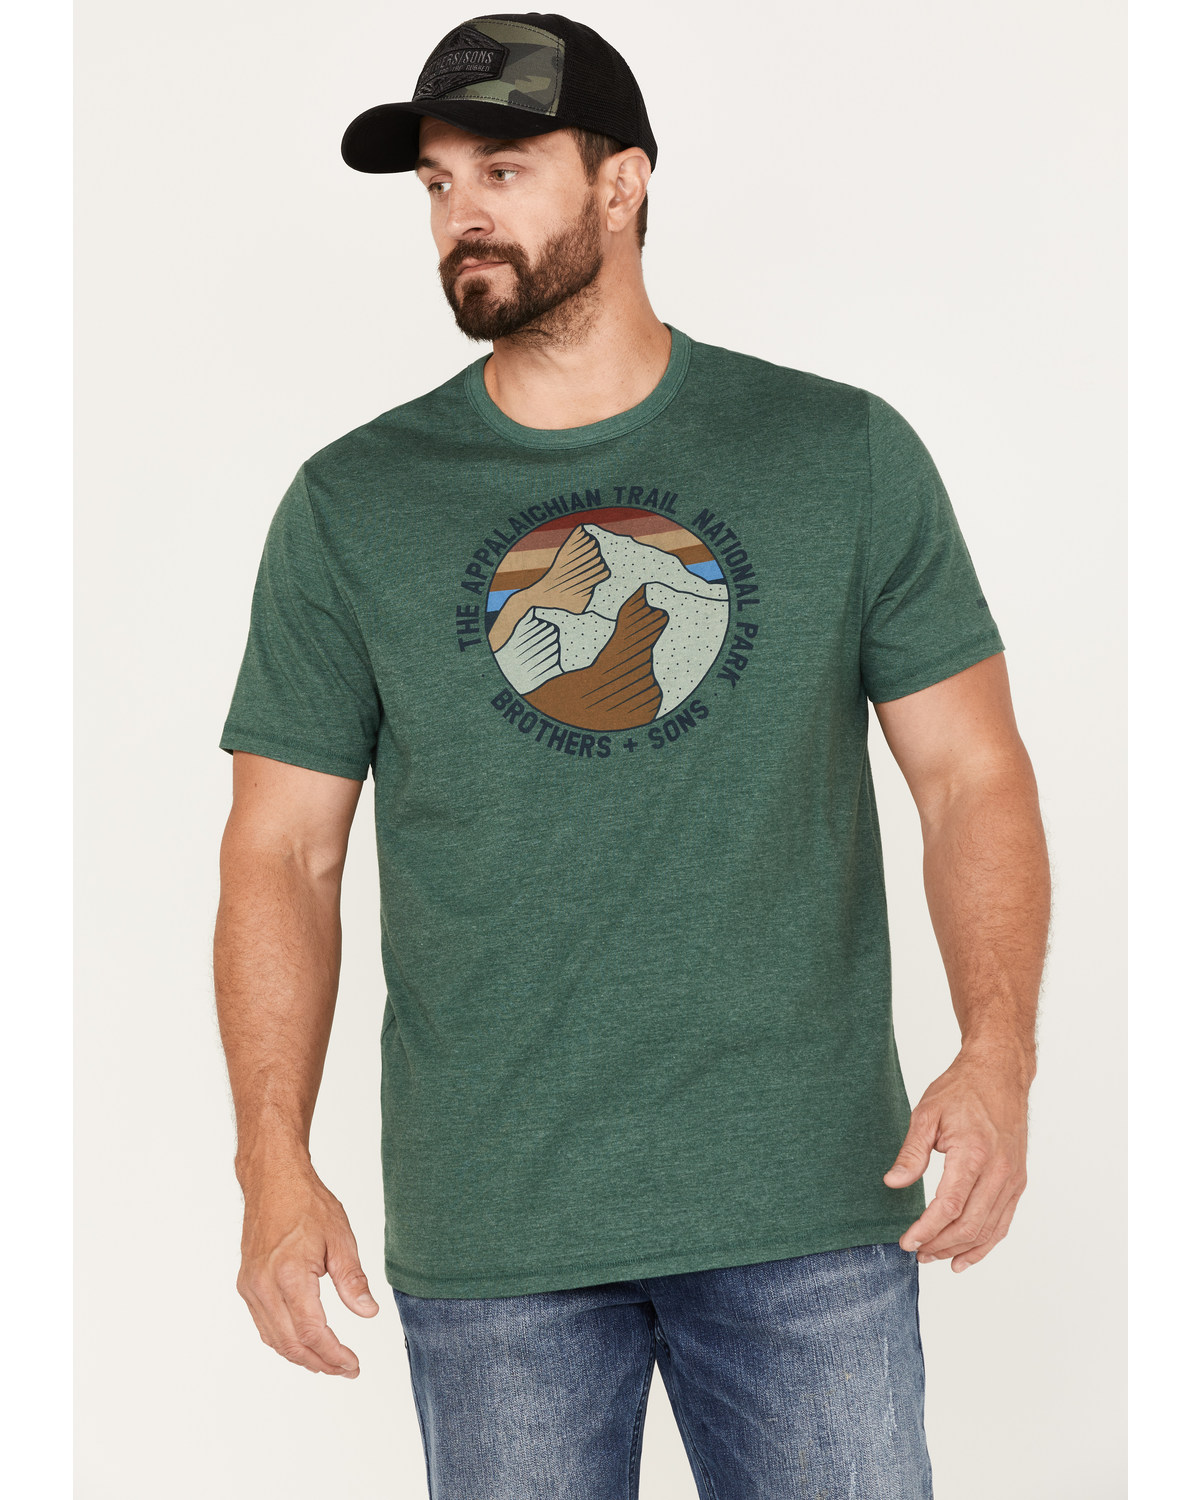 Brothers and Sons Men's Appalachian Trail National Park Graphic T-Shirt